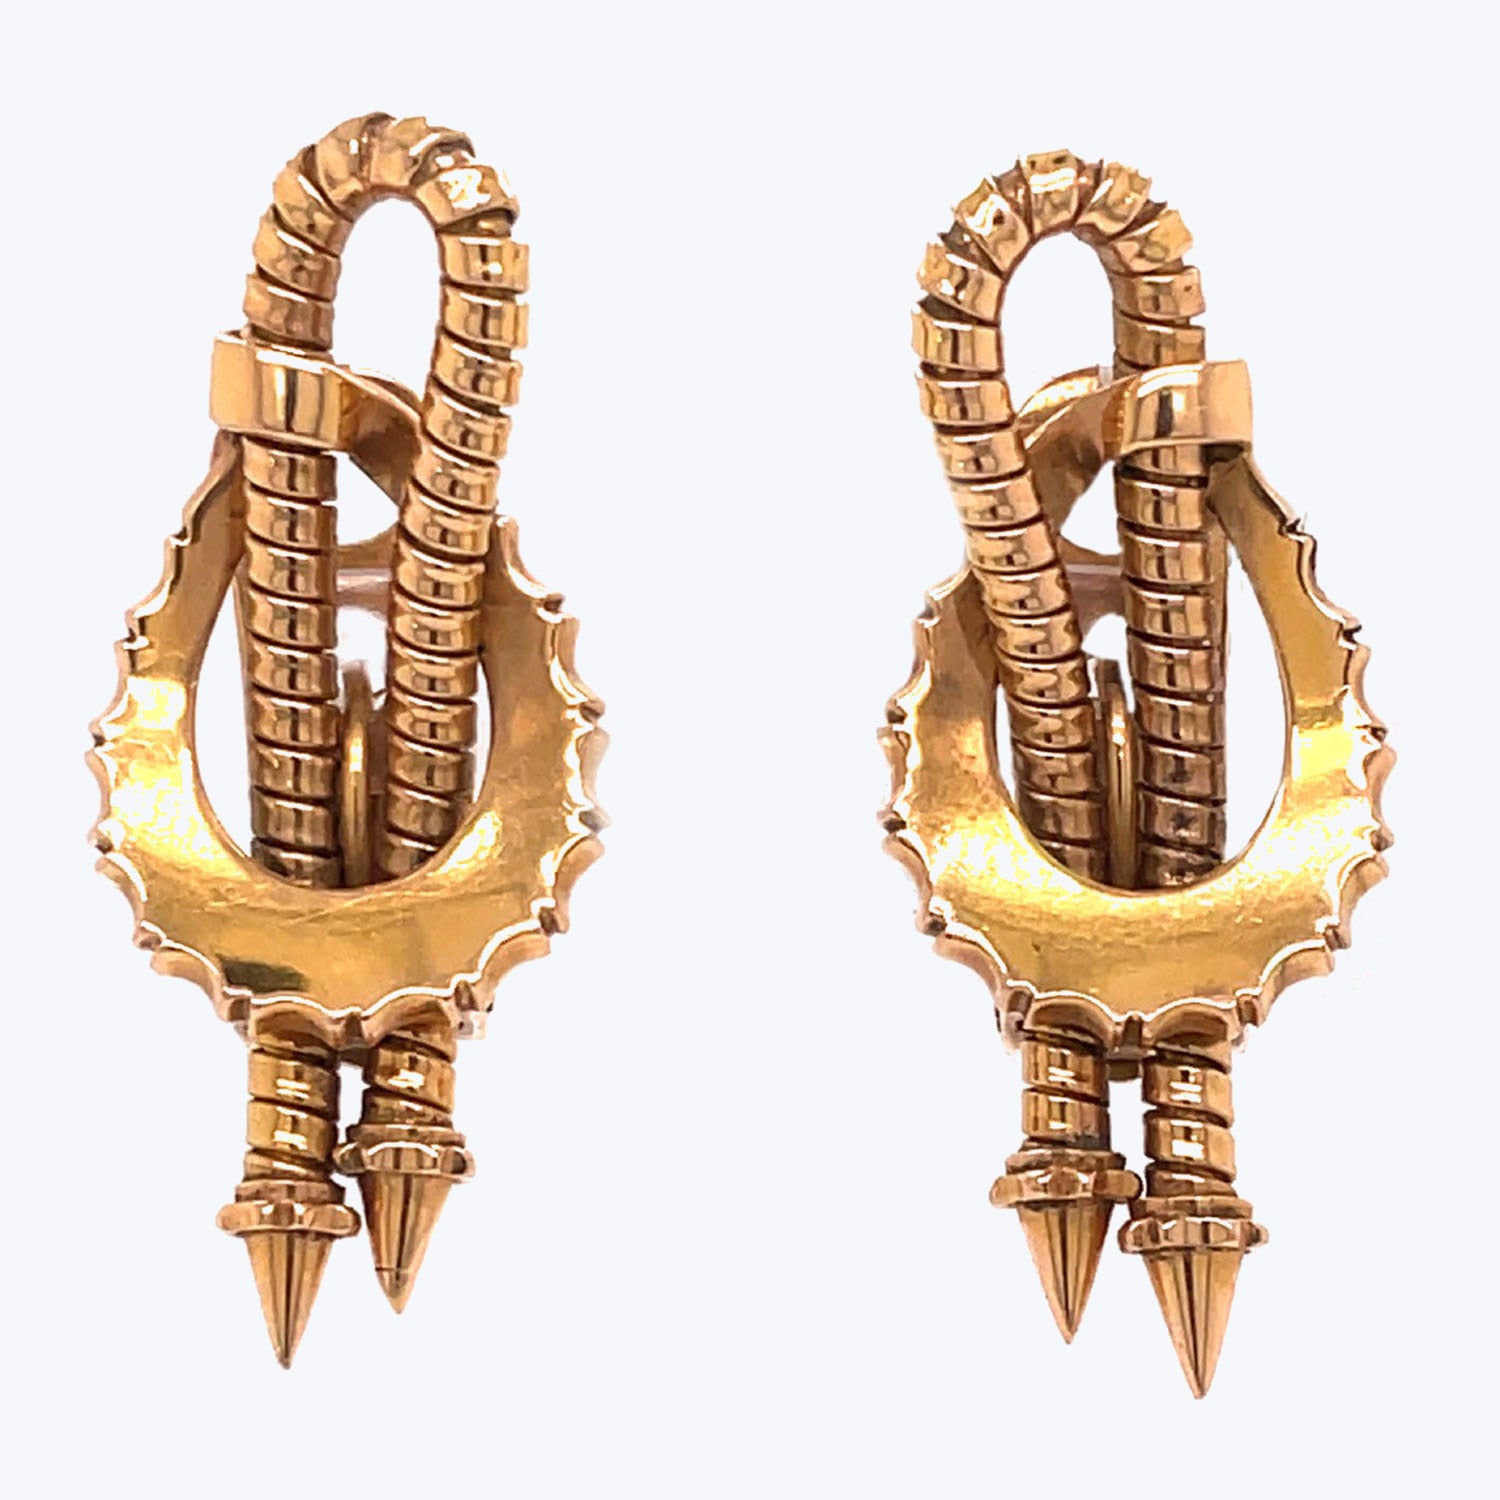 Golden African-inspired earrings with textured pattern and tribal design.